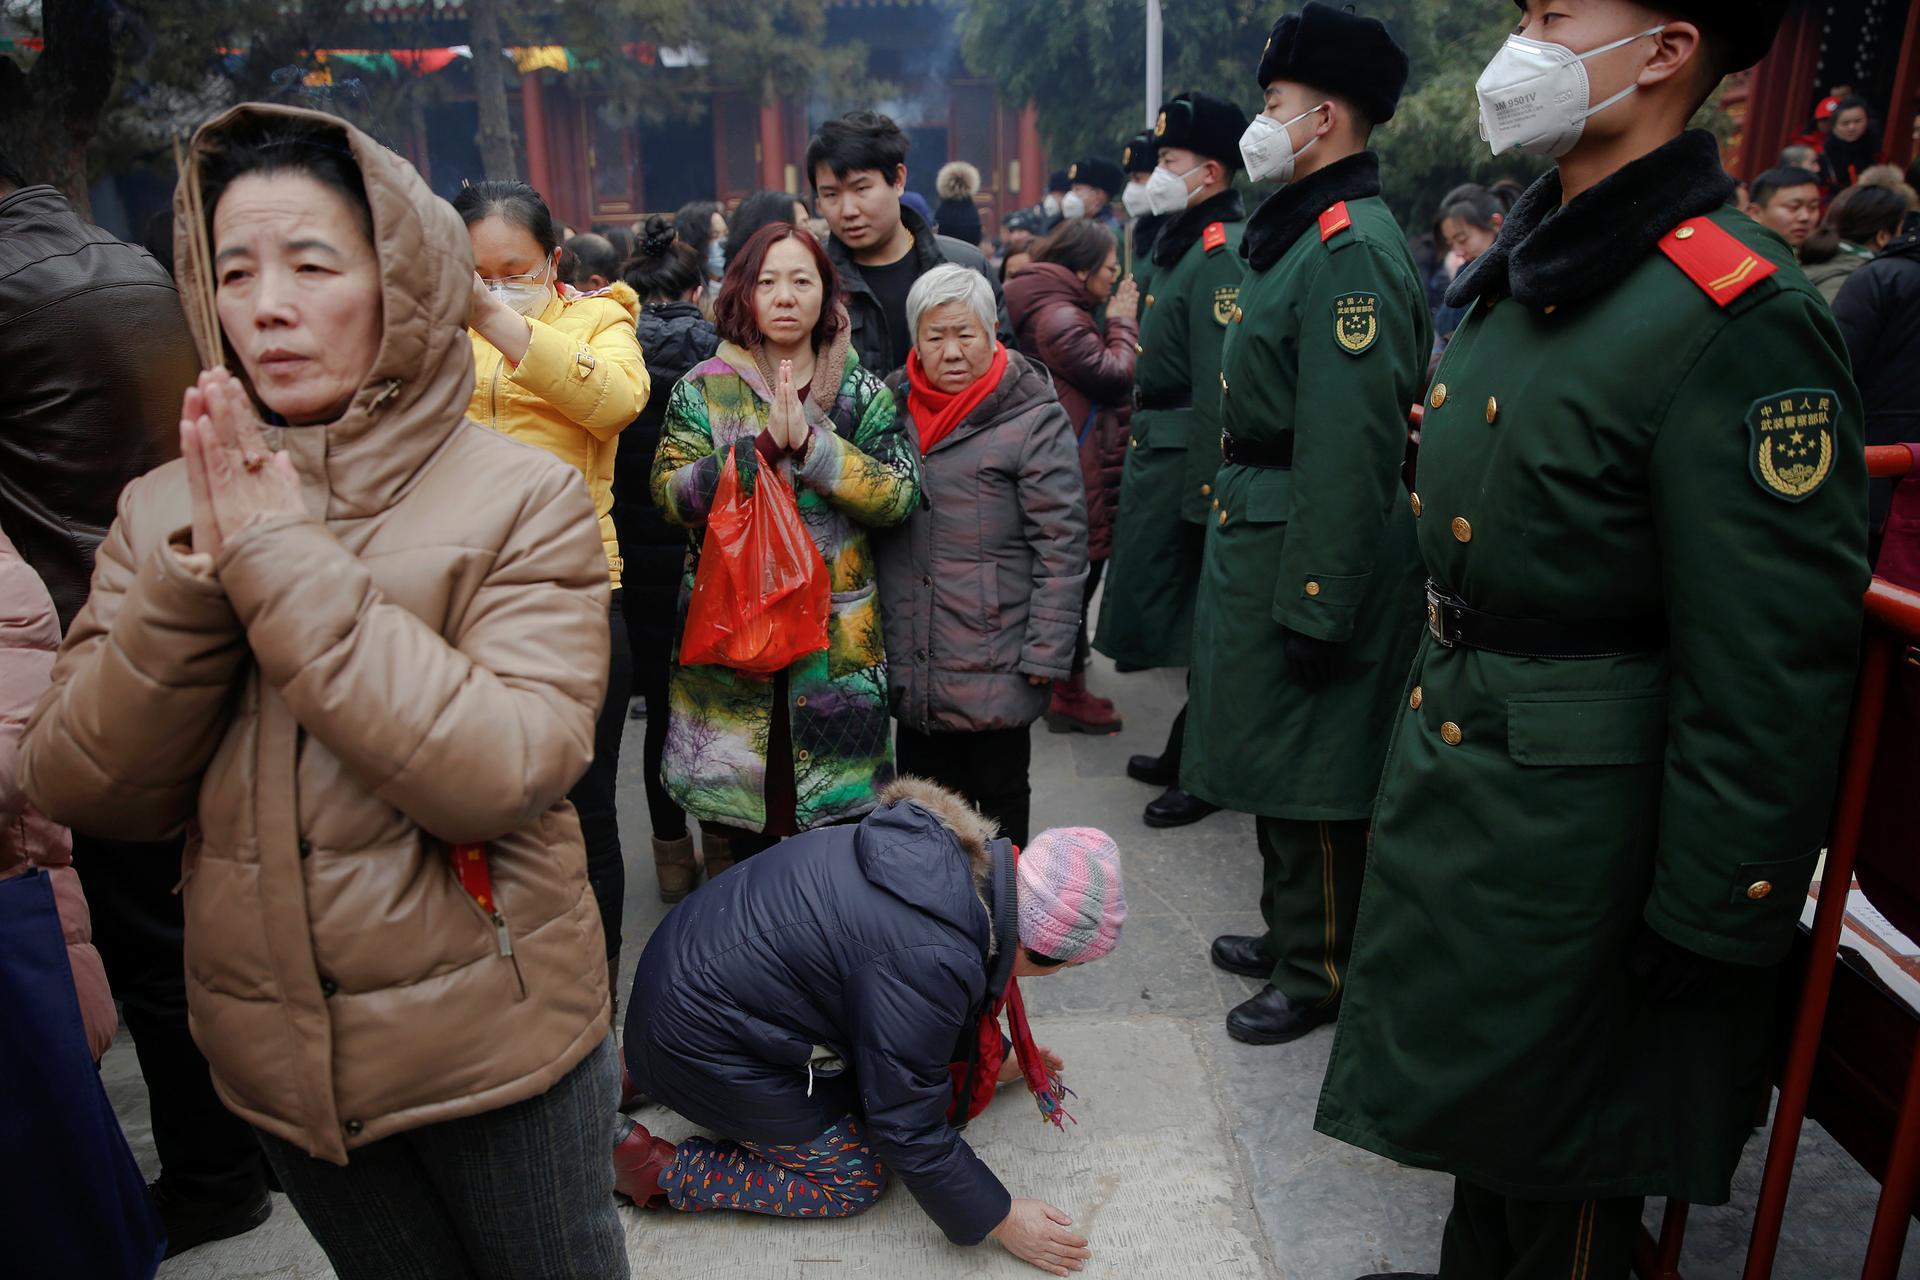 Women pray in front of paramilitary policemen at Yonghegong Lama Temple on the first day of the Lunar New Year of the Rooster in Beijing, China. 